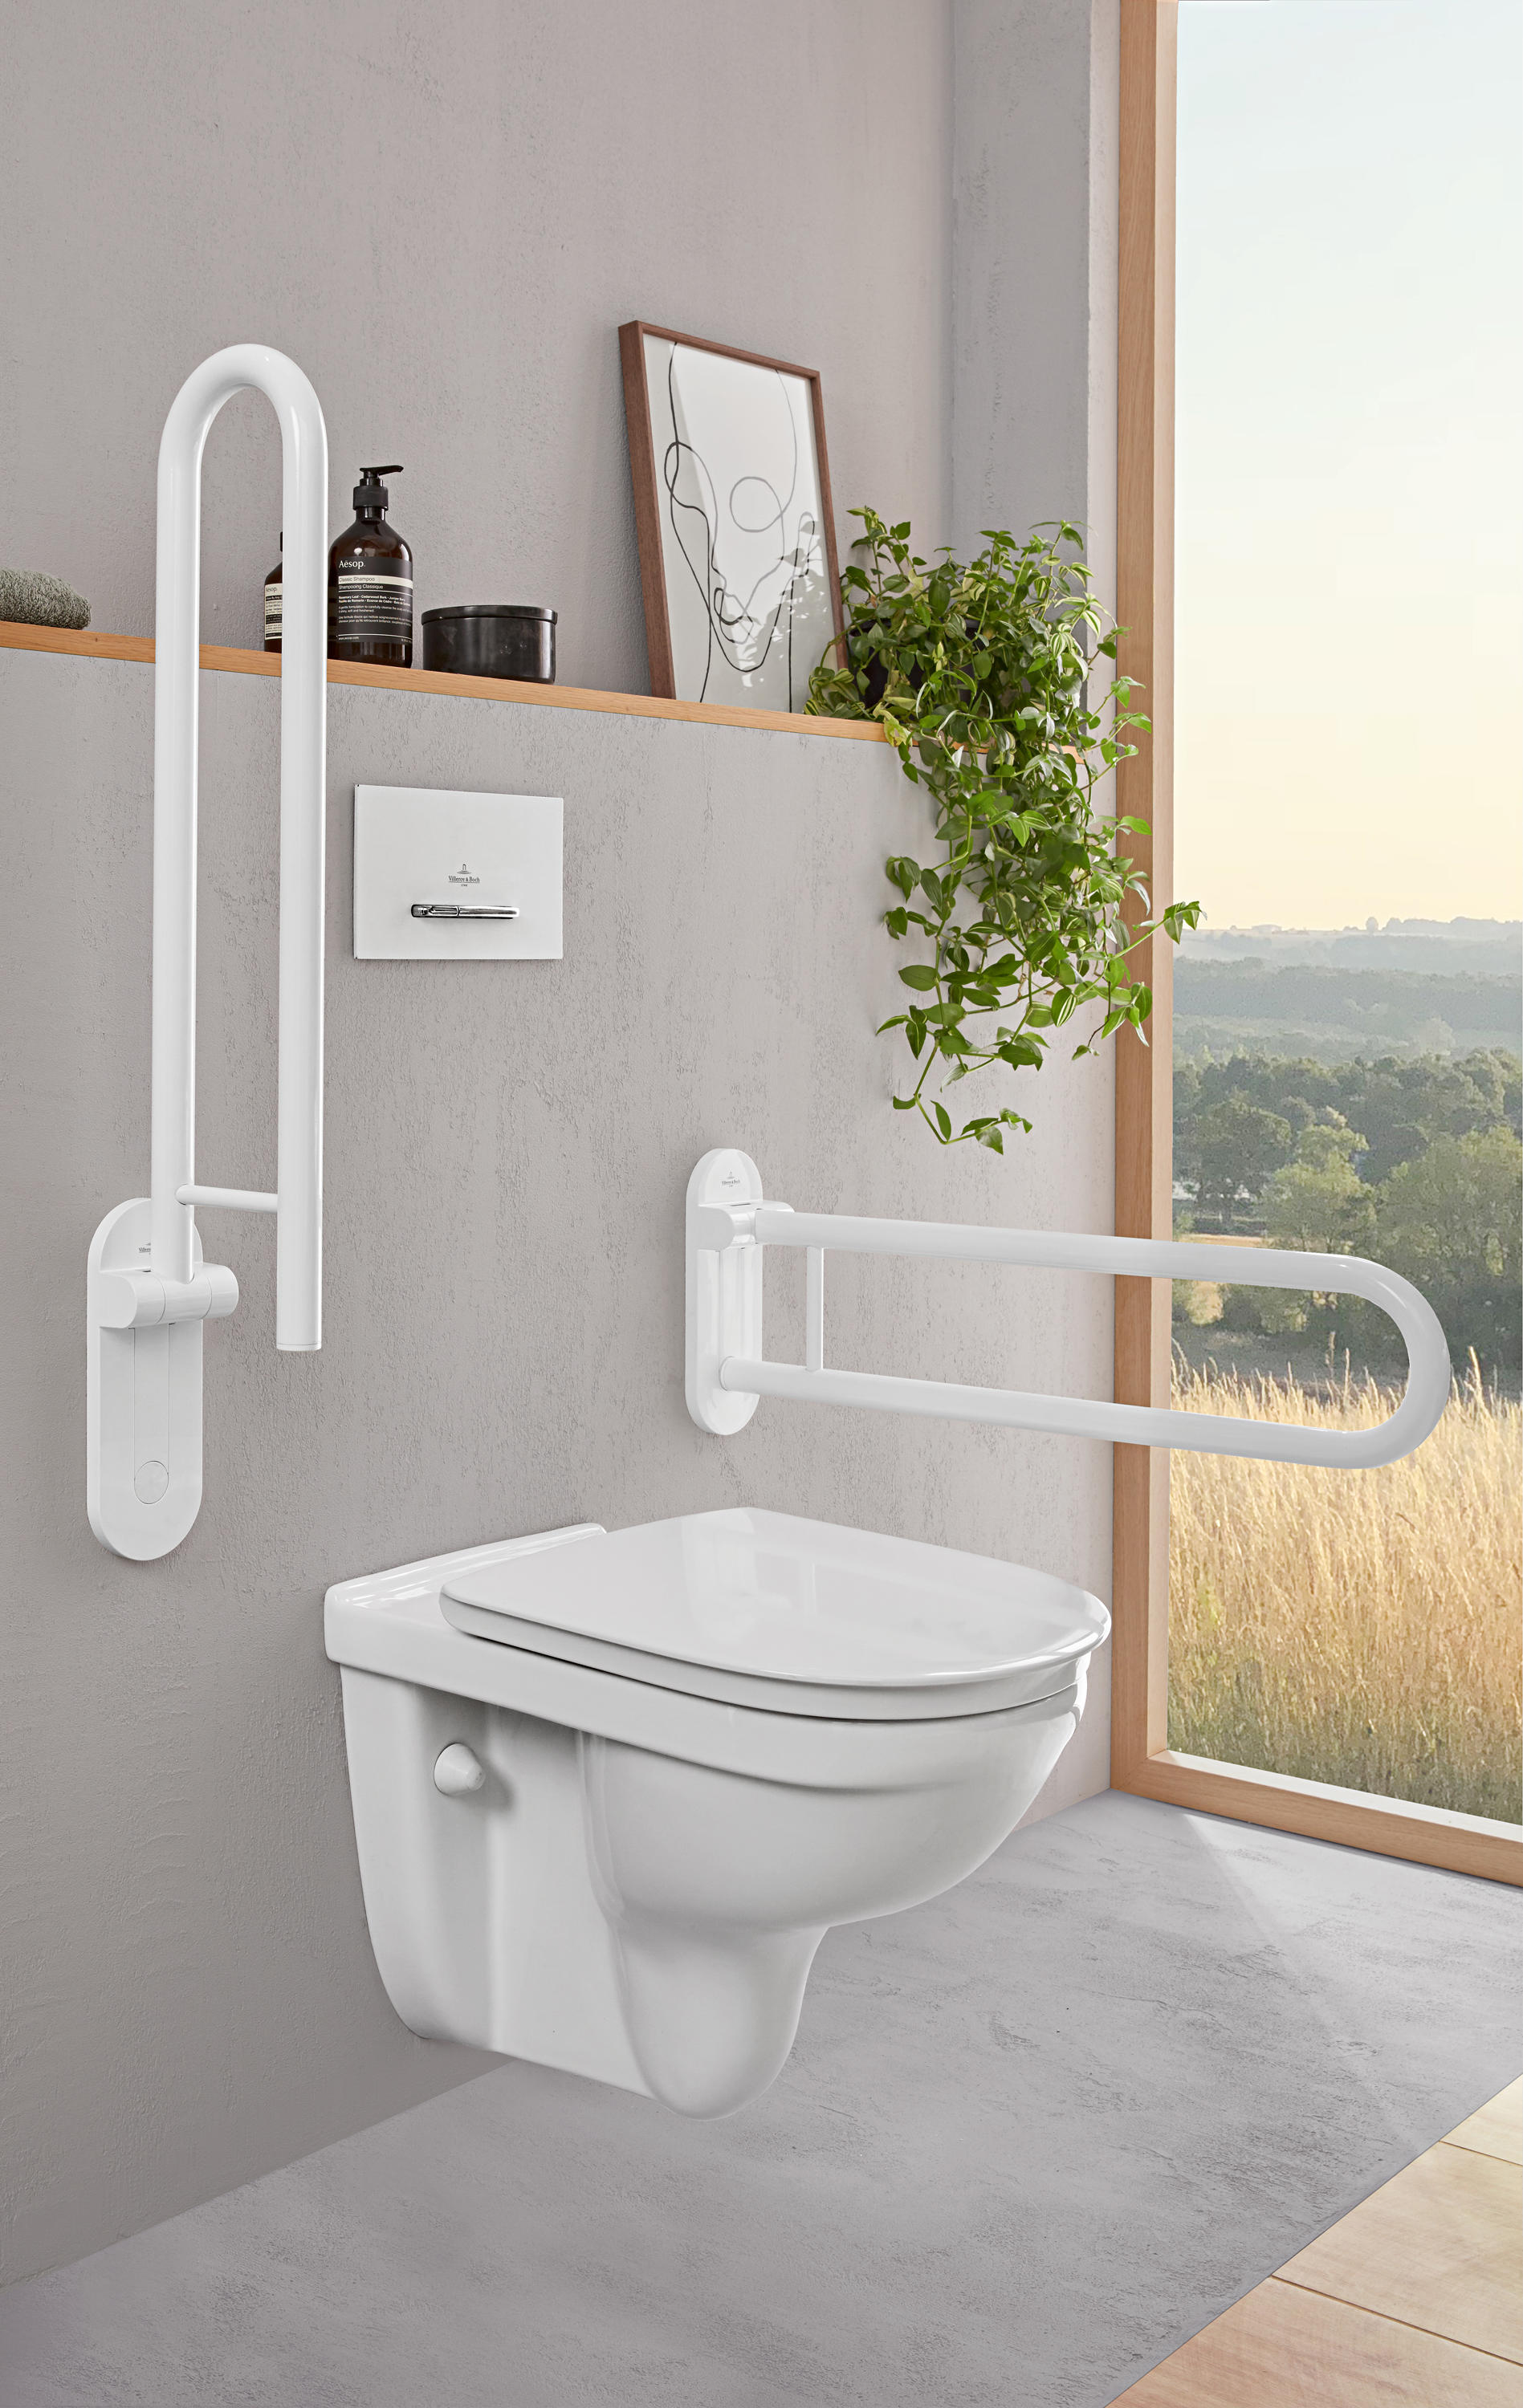 Intimidatie Voorschrift Idioot ViCare Shower Curtain Tube For Corner | Architonic